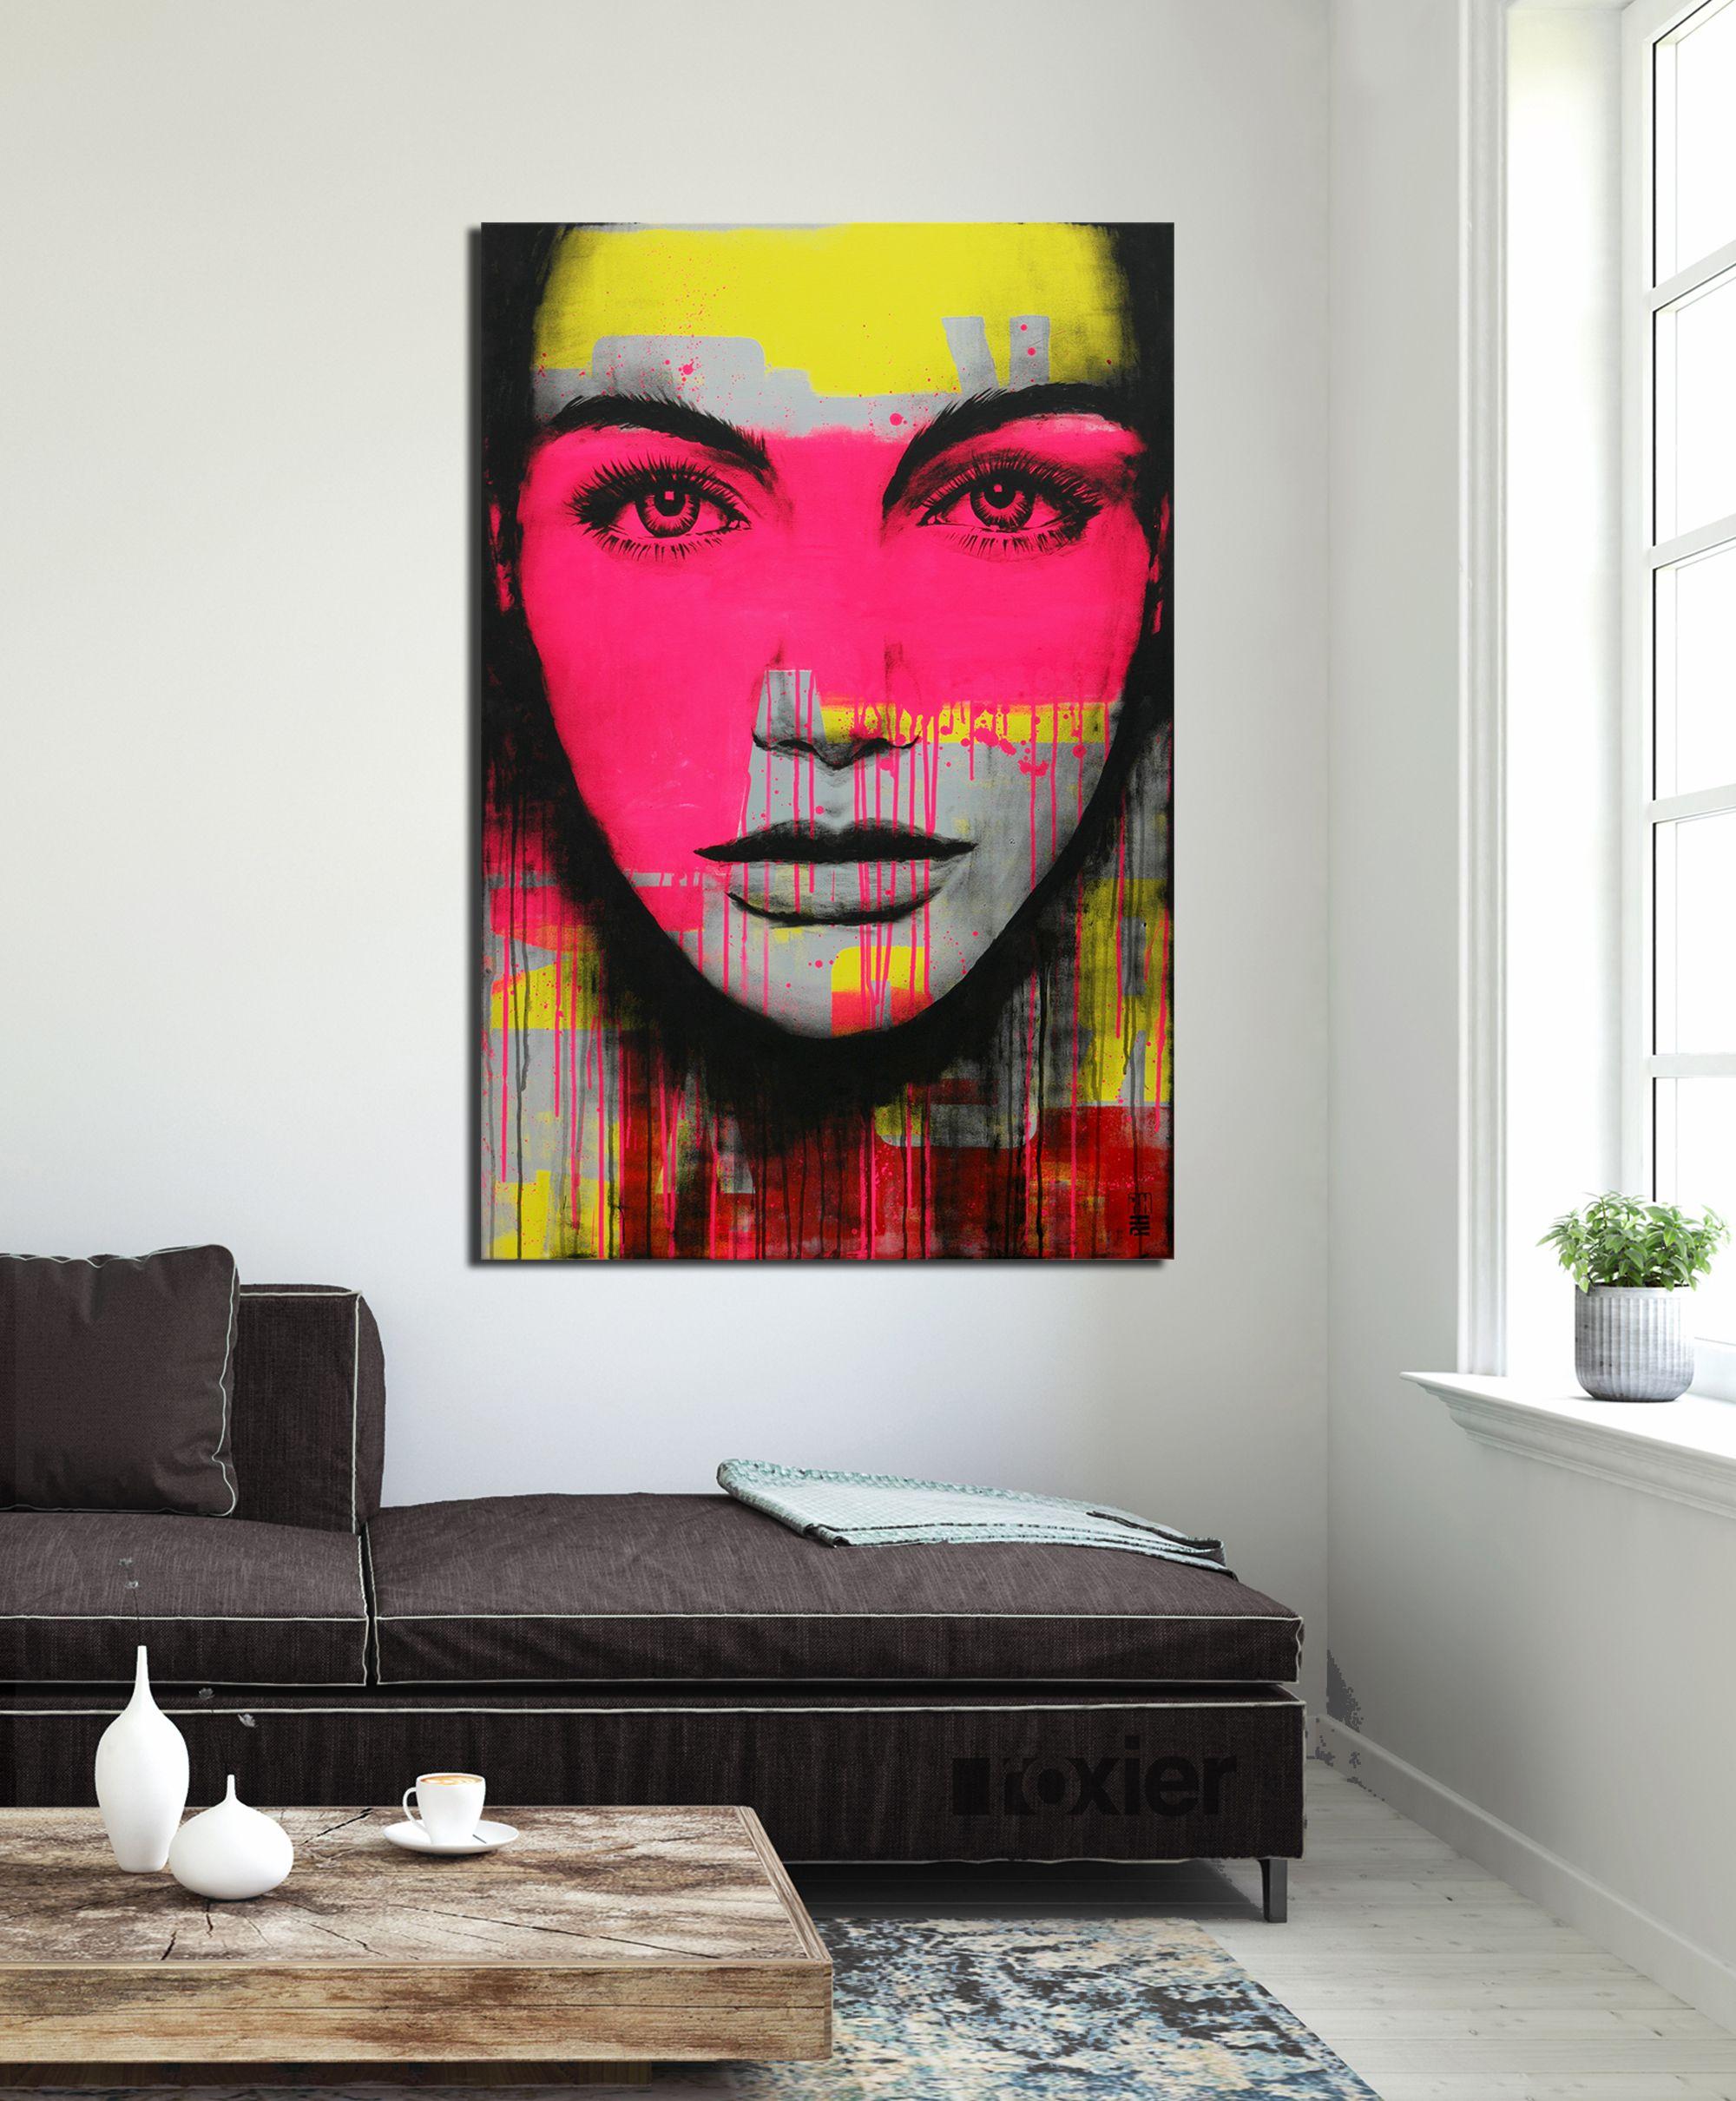 All hand painted pop art girl - Bright Eyes - created by Ronald Hunter in acrylic and neon ink.    Meet â€œBright Eyesâ€, the latest addition to Ronaldâ€™s â€˜Pop Art Girlâ€™ serie. â€˜Pop Art Girlâ€™ is a serie of paintings where he mixes a female